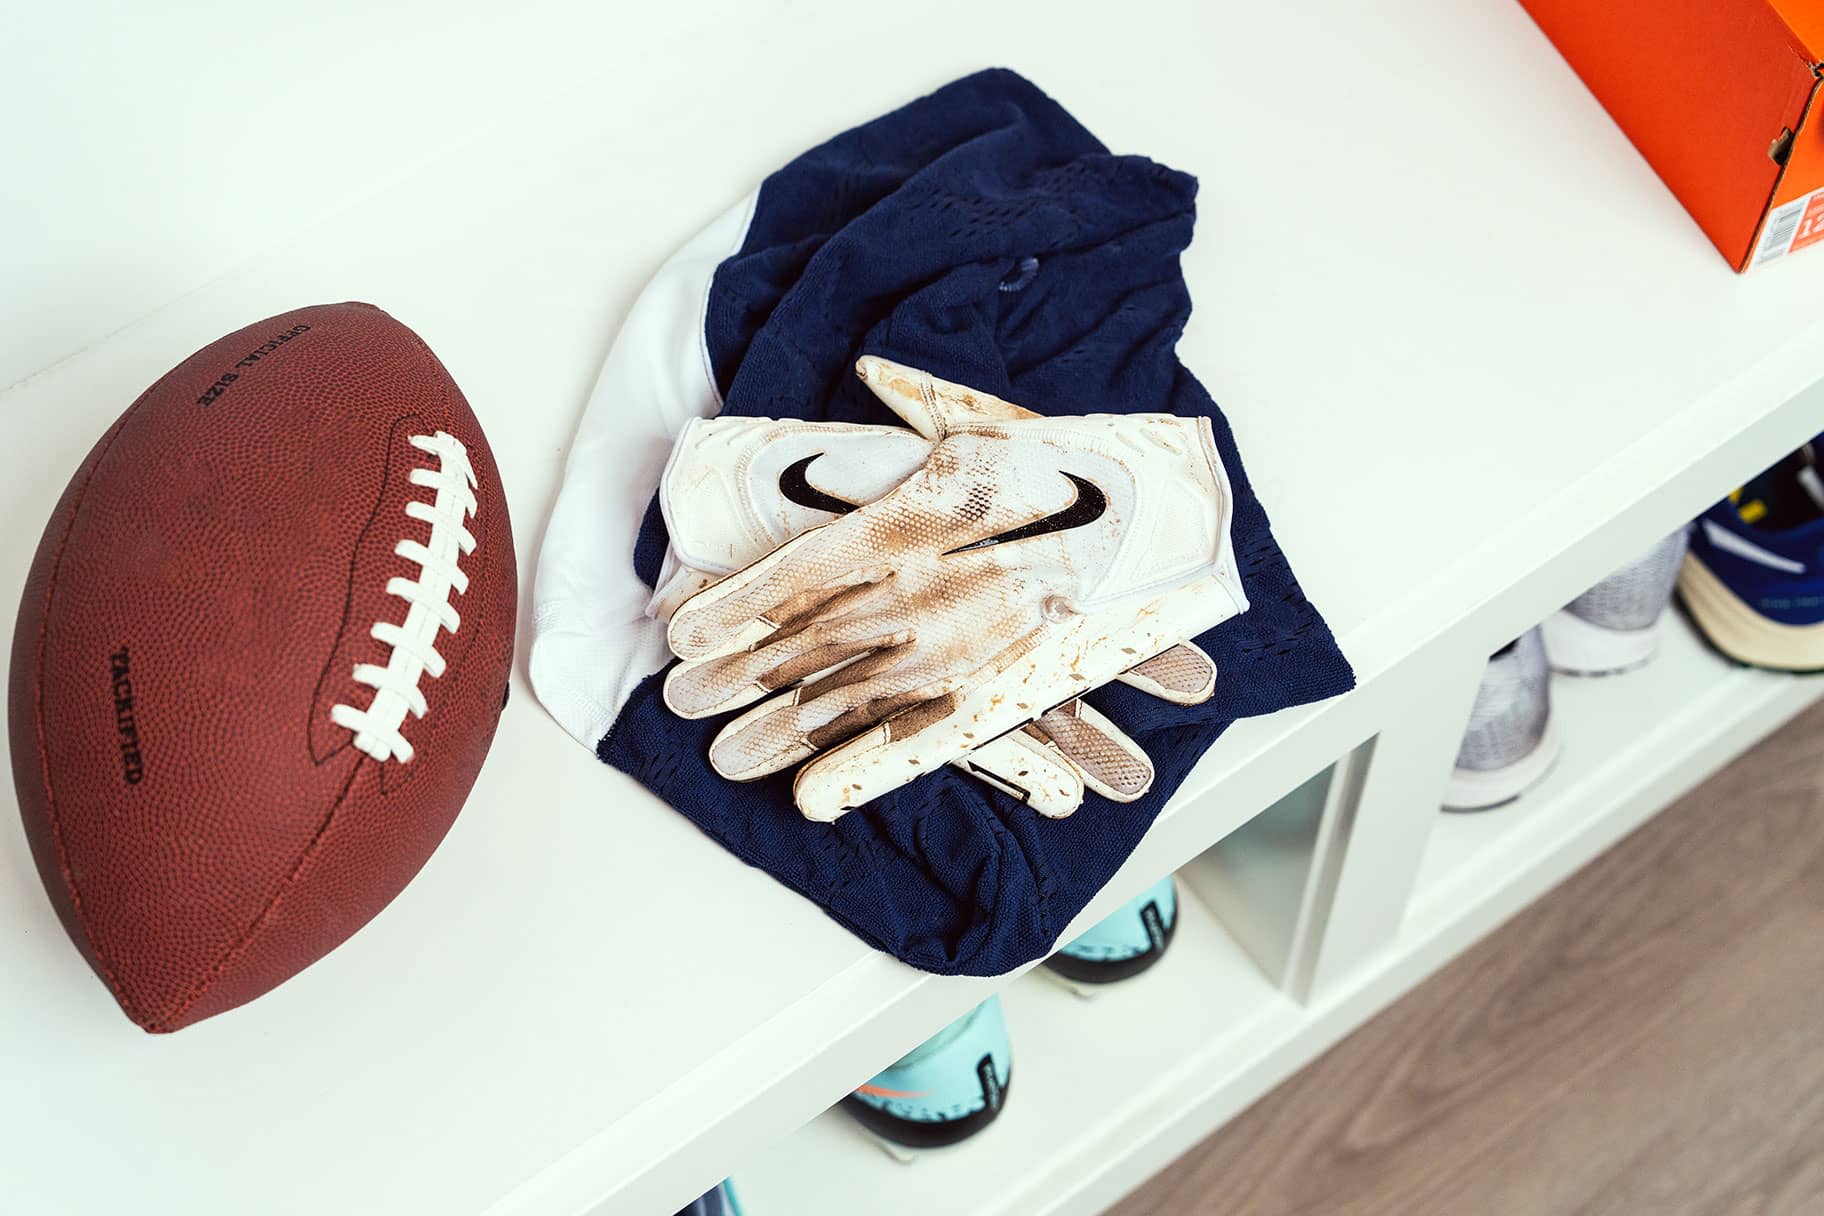 How to Clean Football Gloves